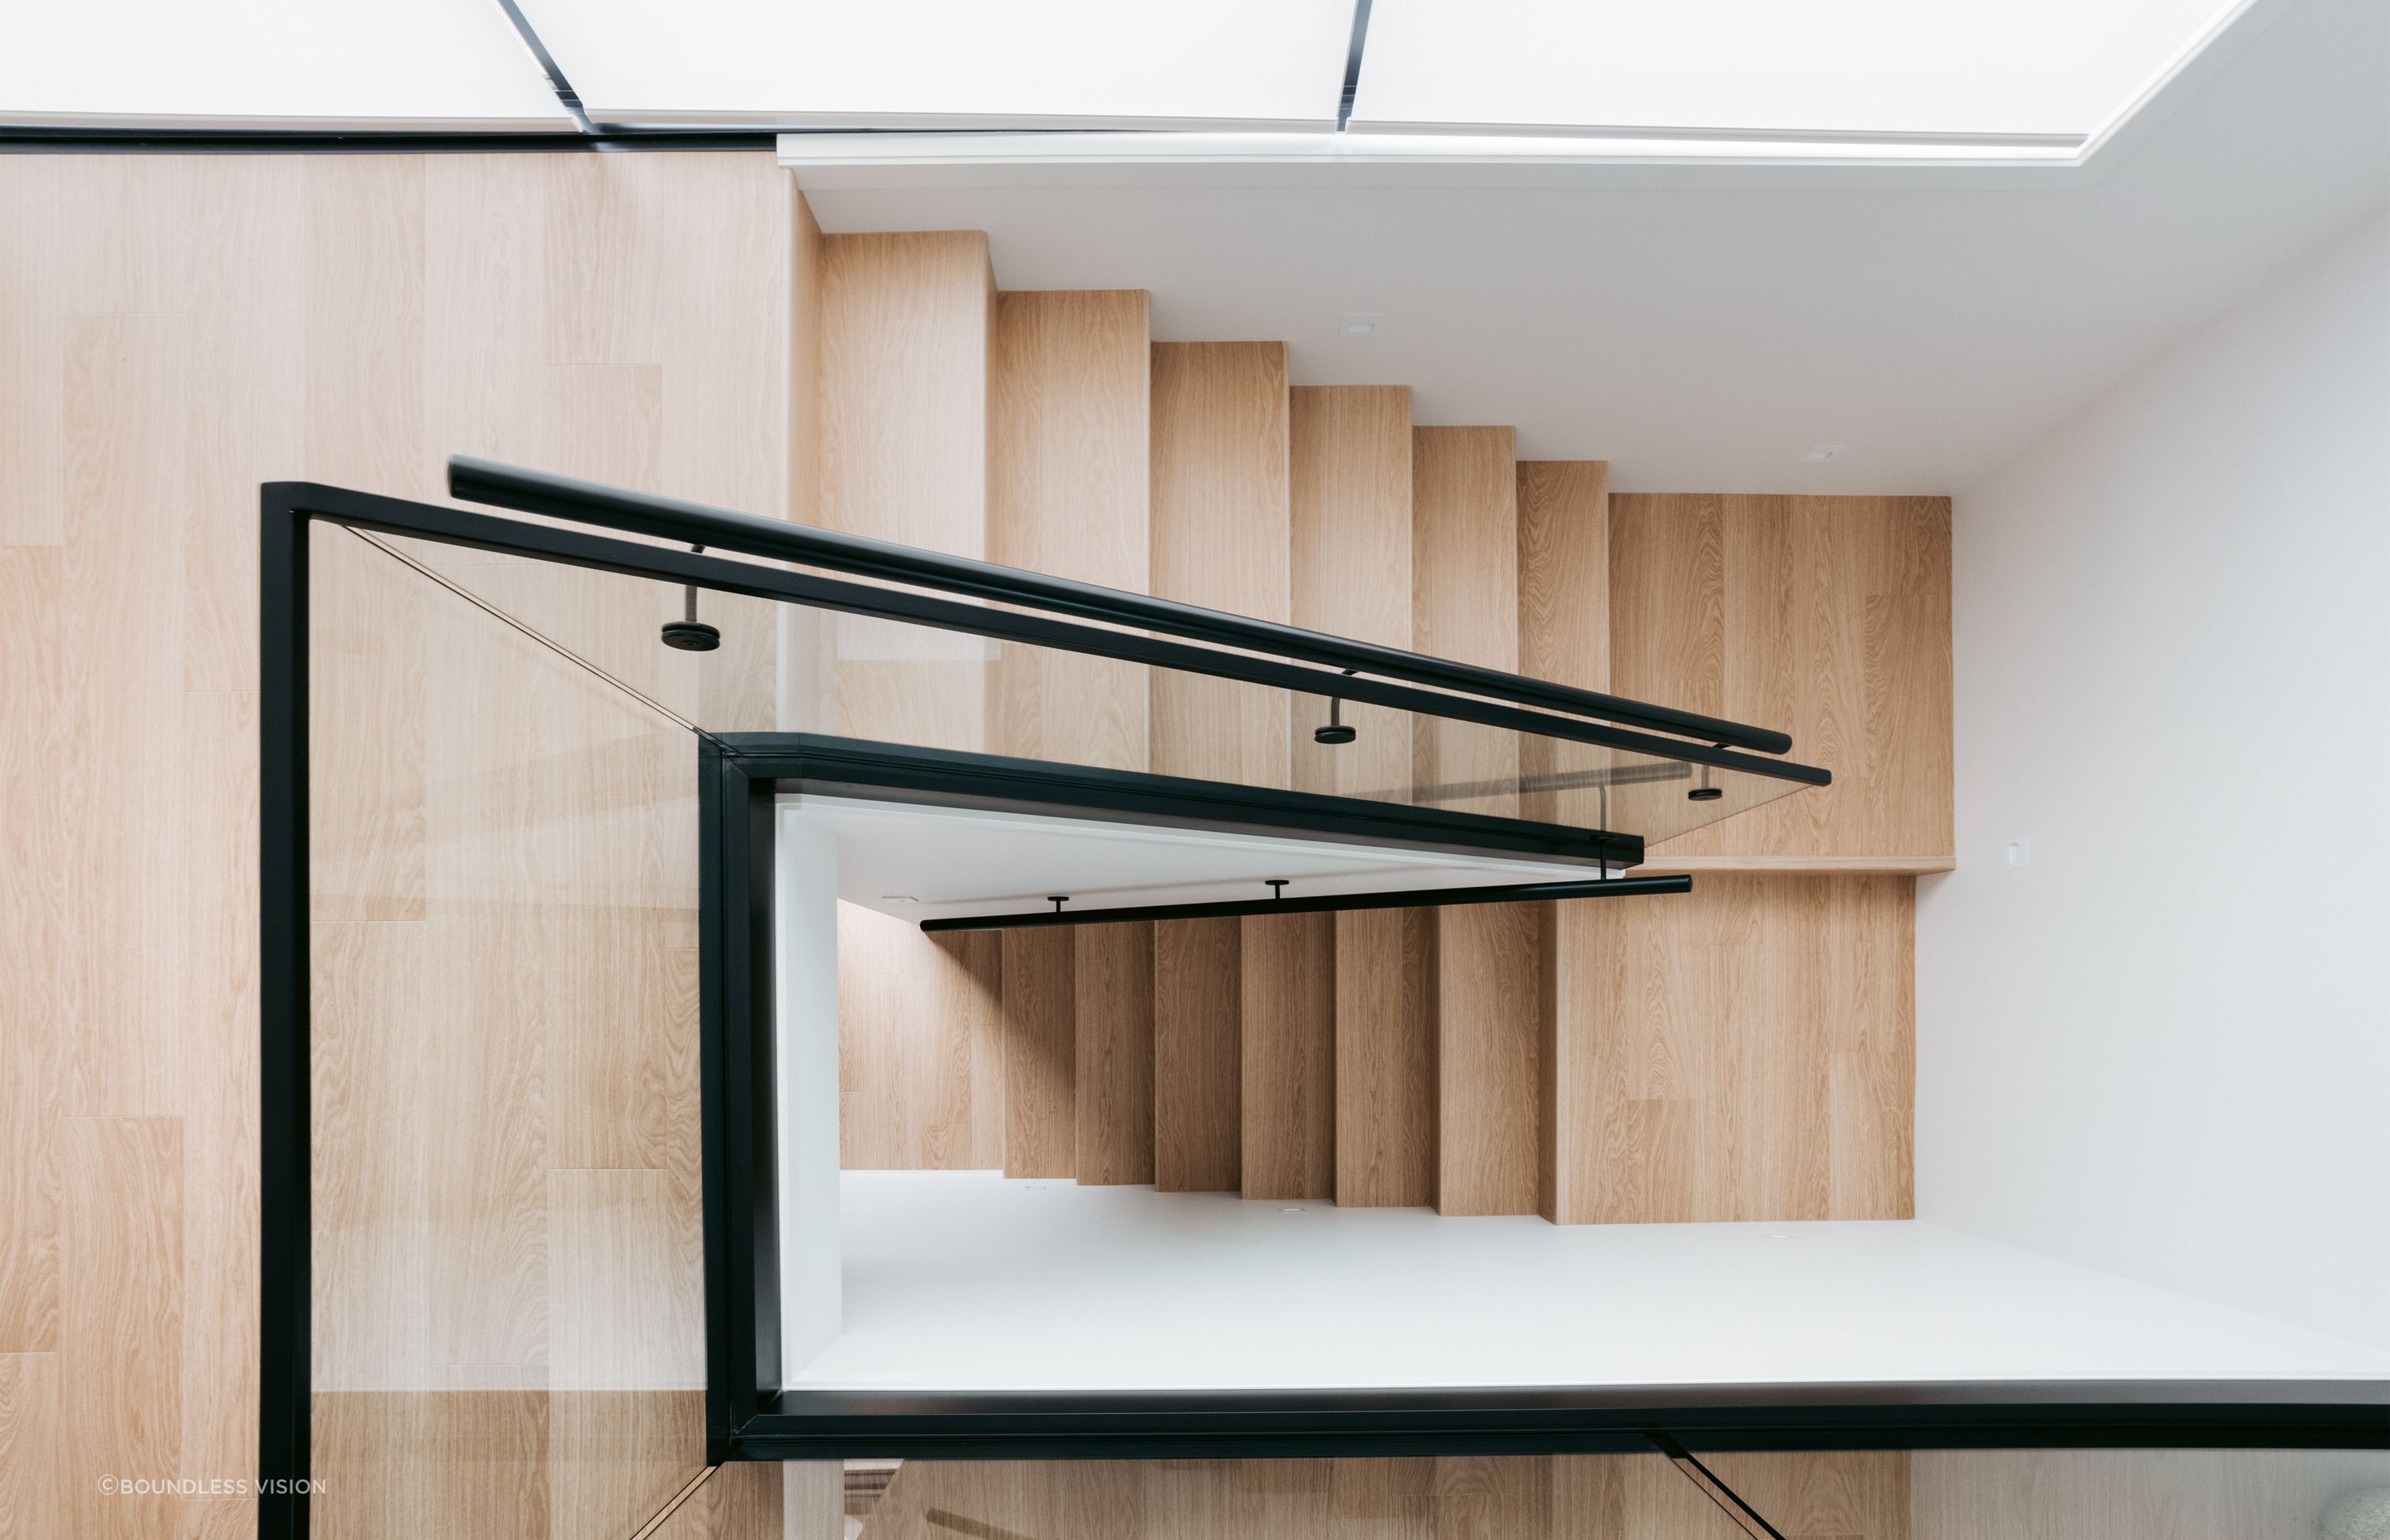 A beautifully crafted timber staircase sits below a soaring void.